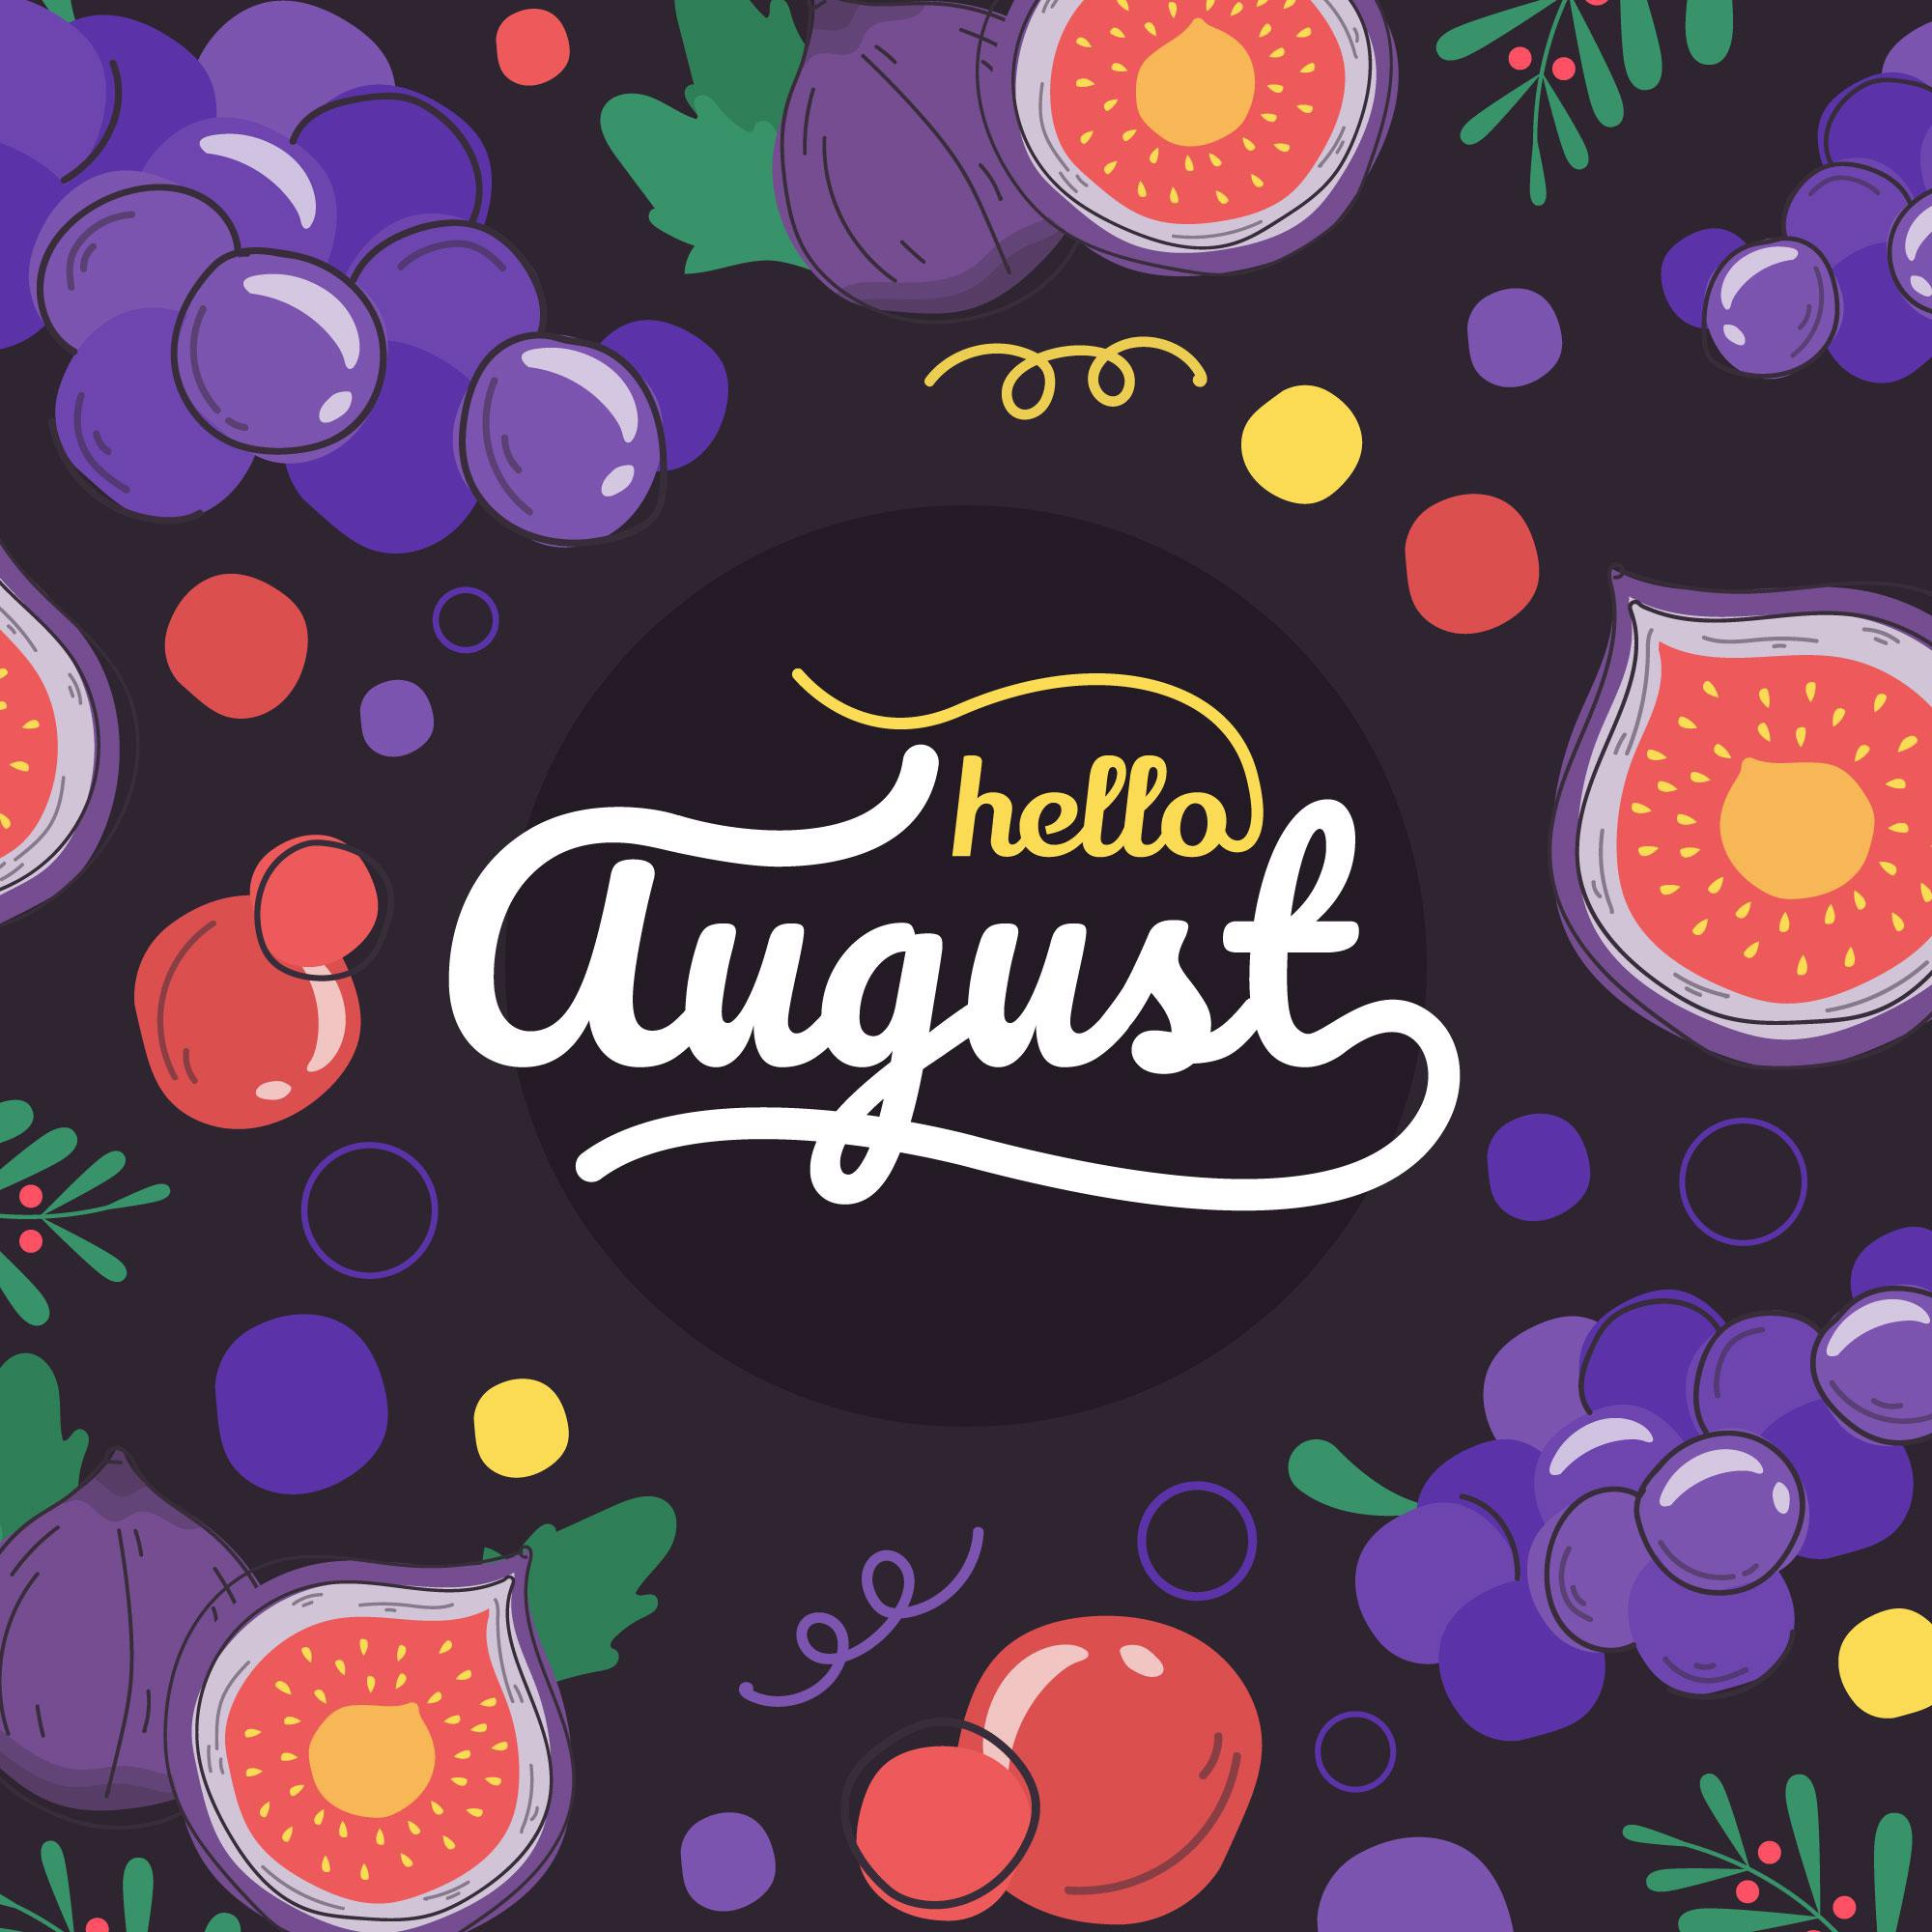 Hand drawn august lettering with fruits